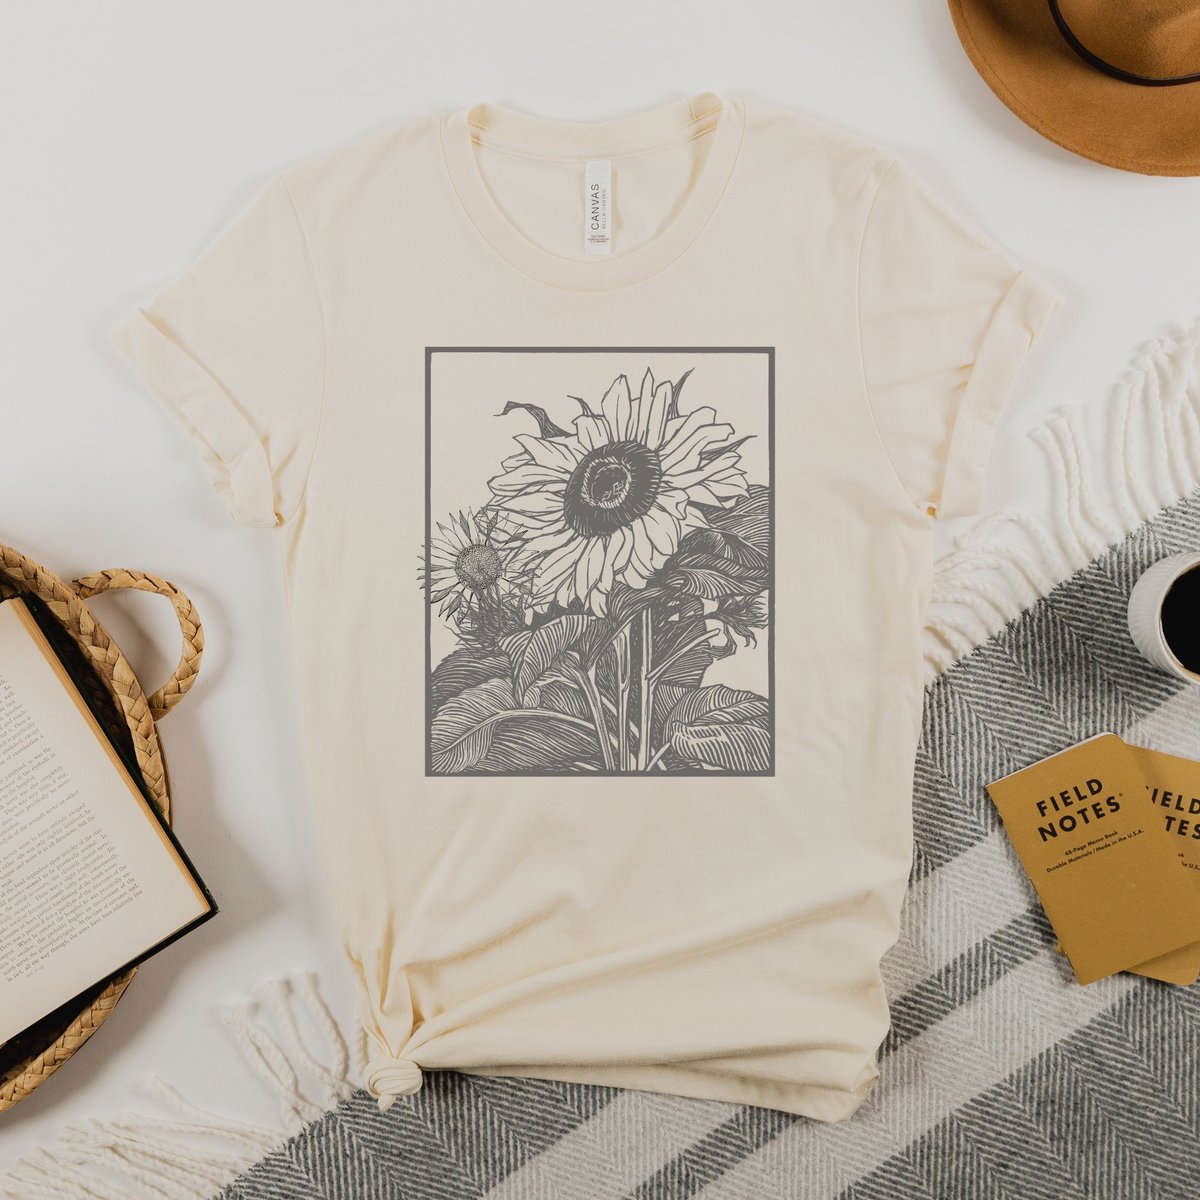 Excited to share the latest addition to my #etsy shop: Sunflower Shirt, Spring Shirt for Women, Cute Sunflower Spring Tshirt, Flower Jersey Short Sleeve Tee etsy.me/4181mfR #sunflowershirt #flowershirt #cutesunflower #springtshirt #springshirt #sunflower #sprin